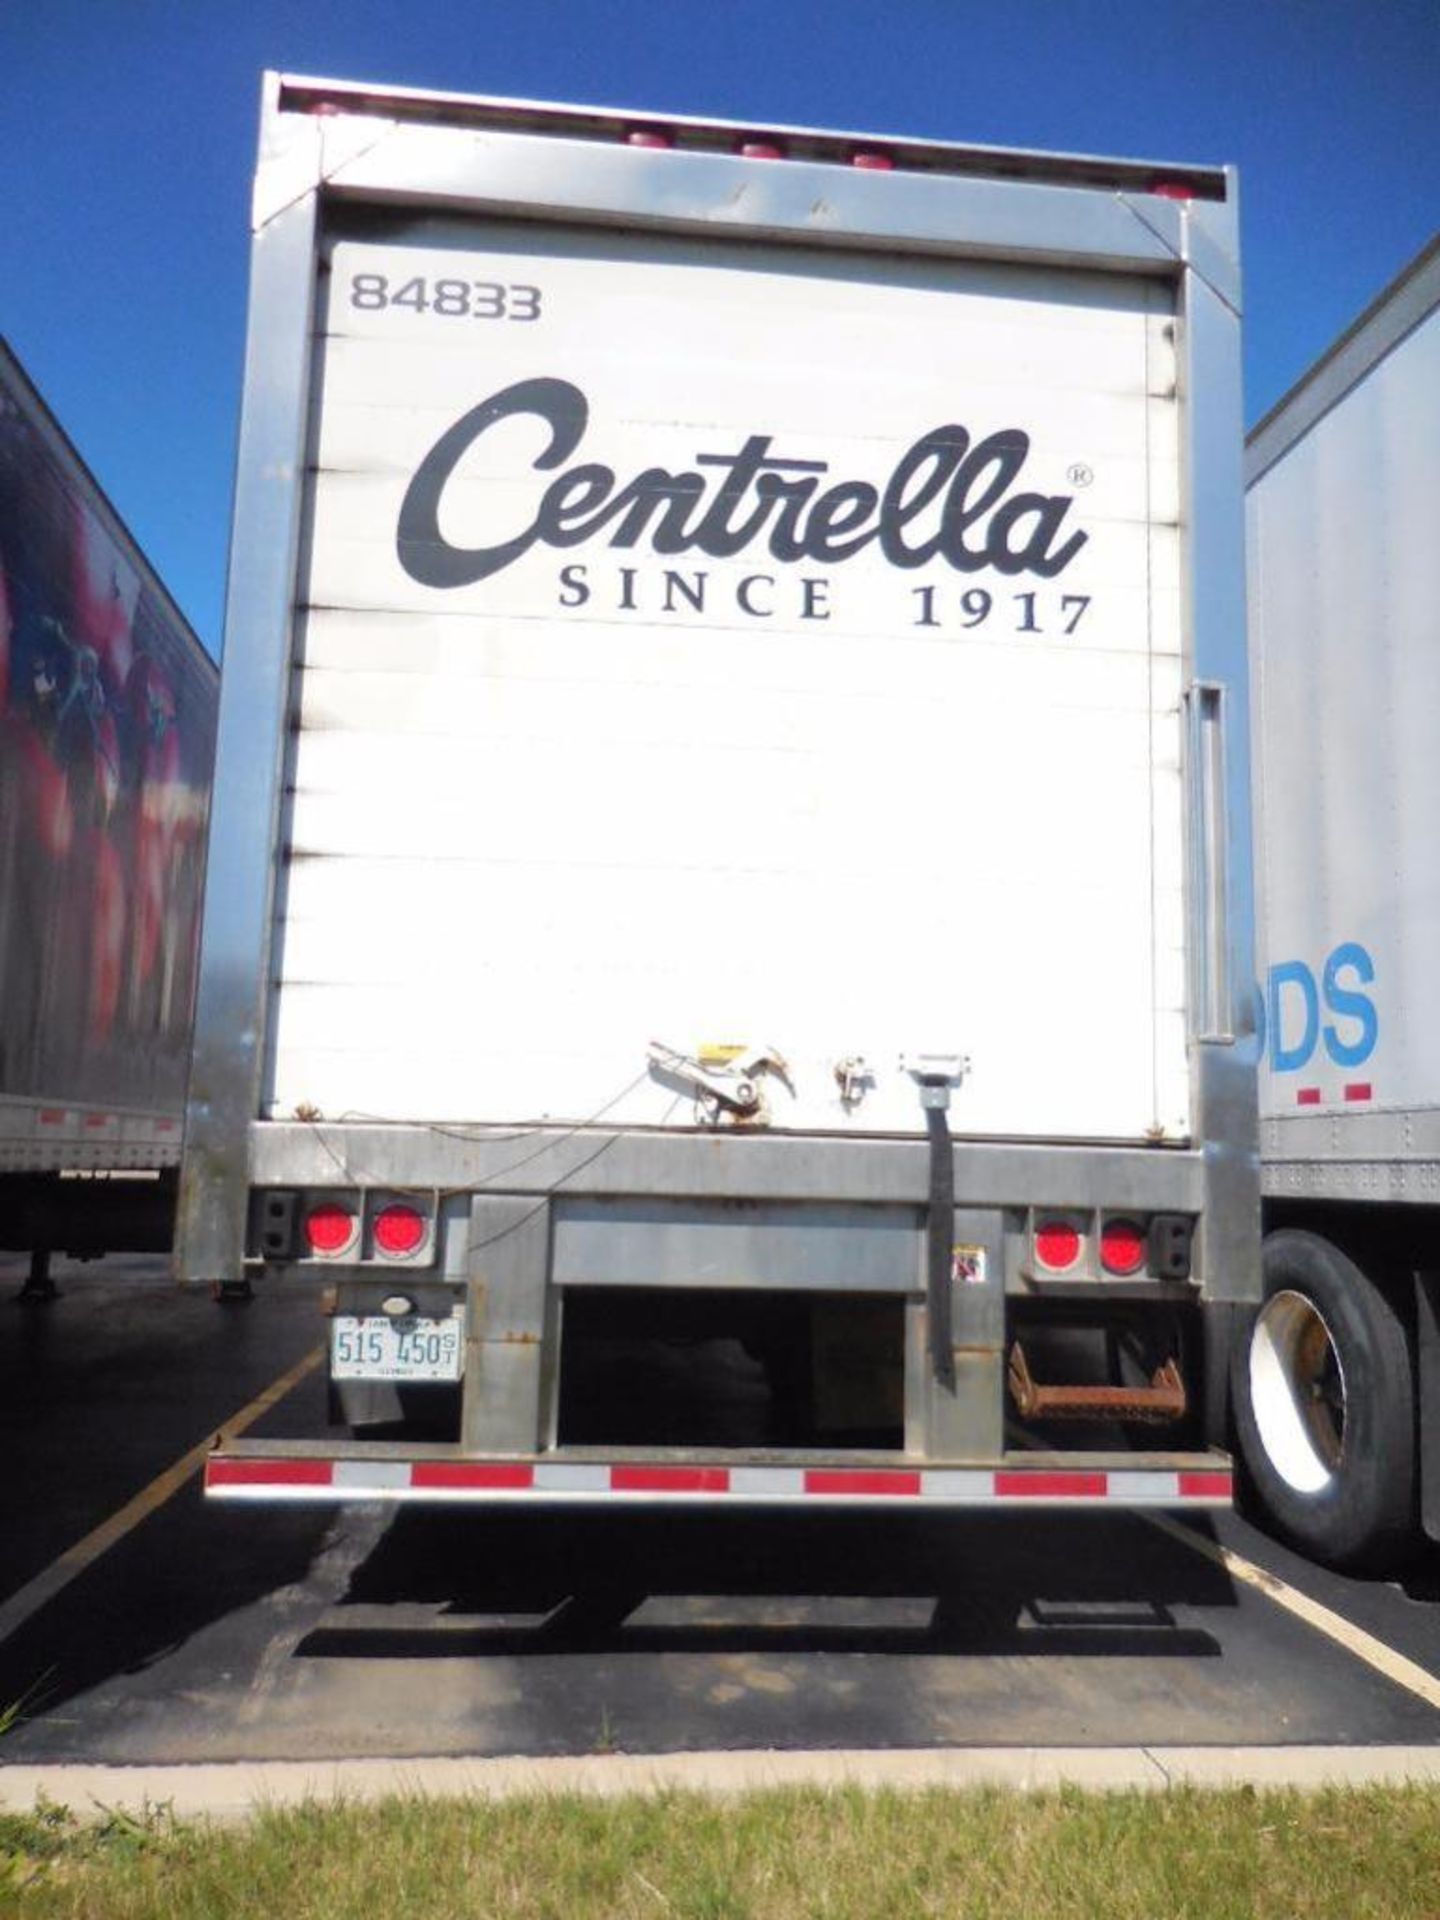 2004 Great Dane 48' Refrigerated Trailer, VIN # 1GRAA96245B703097, Unit 84833 - Image 4 of 16